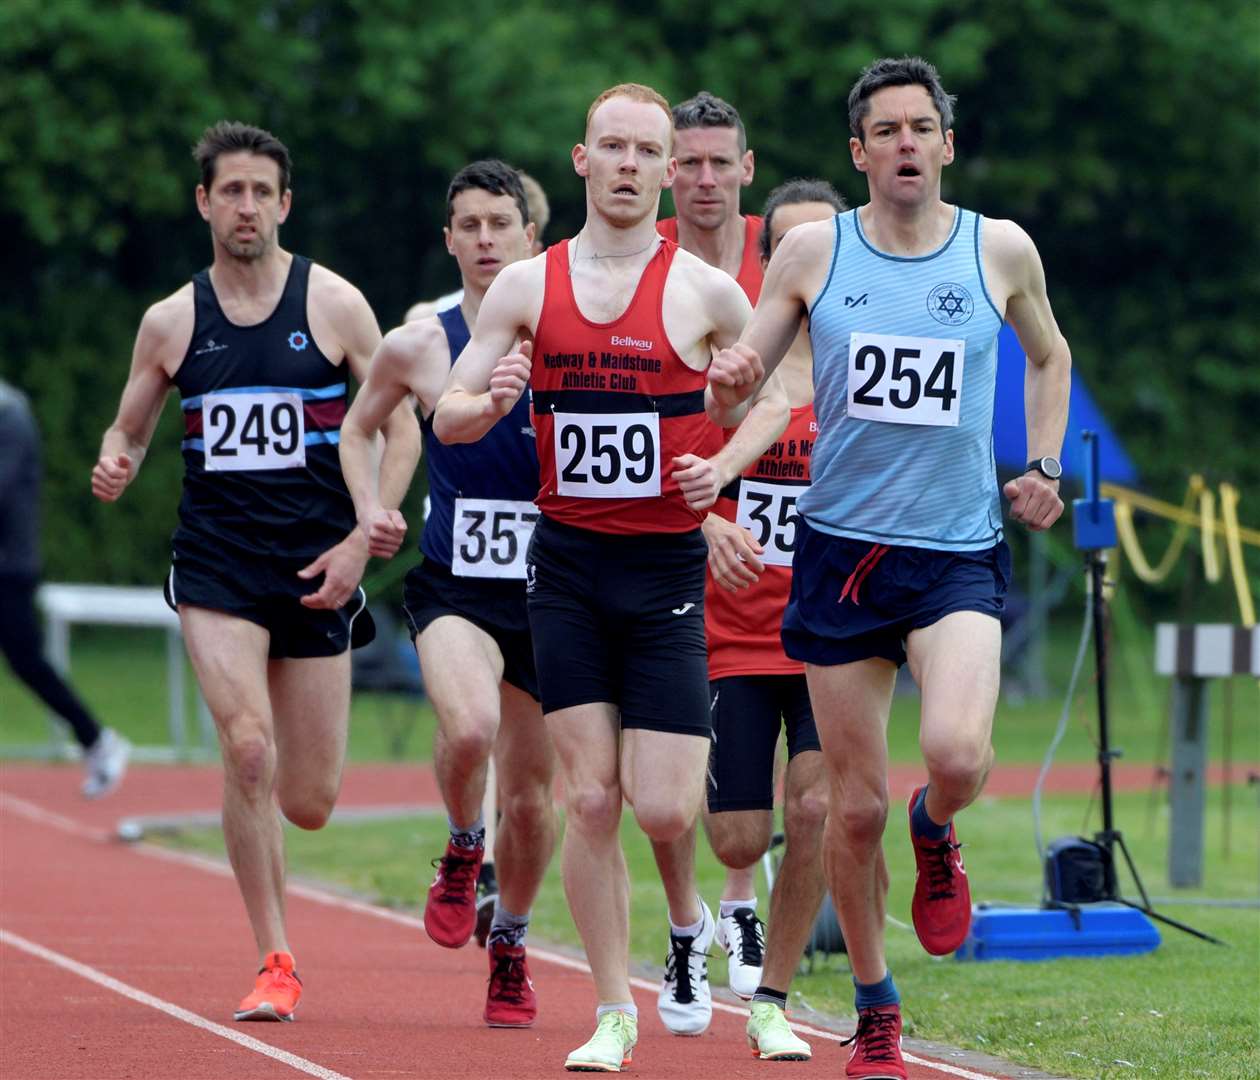 Jamie Walsh (No.259) representing Medway and Maidstone in the senior men’s 1,500m final. Picture: Barry Goodwin